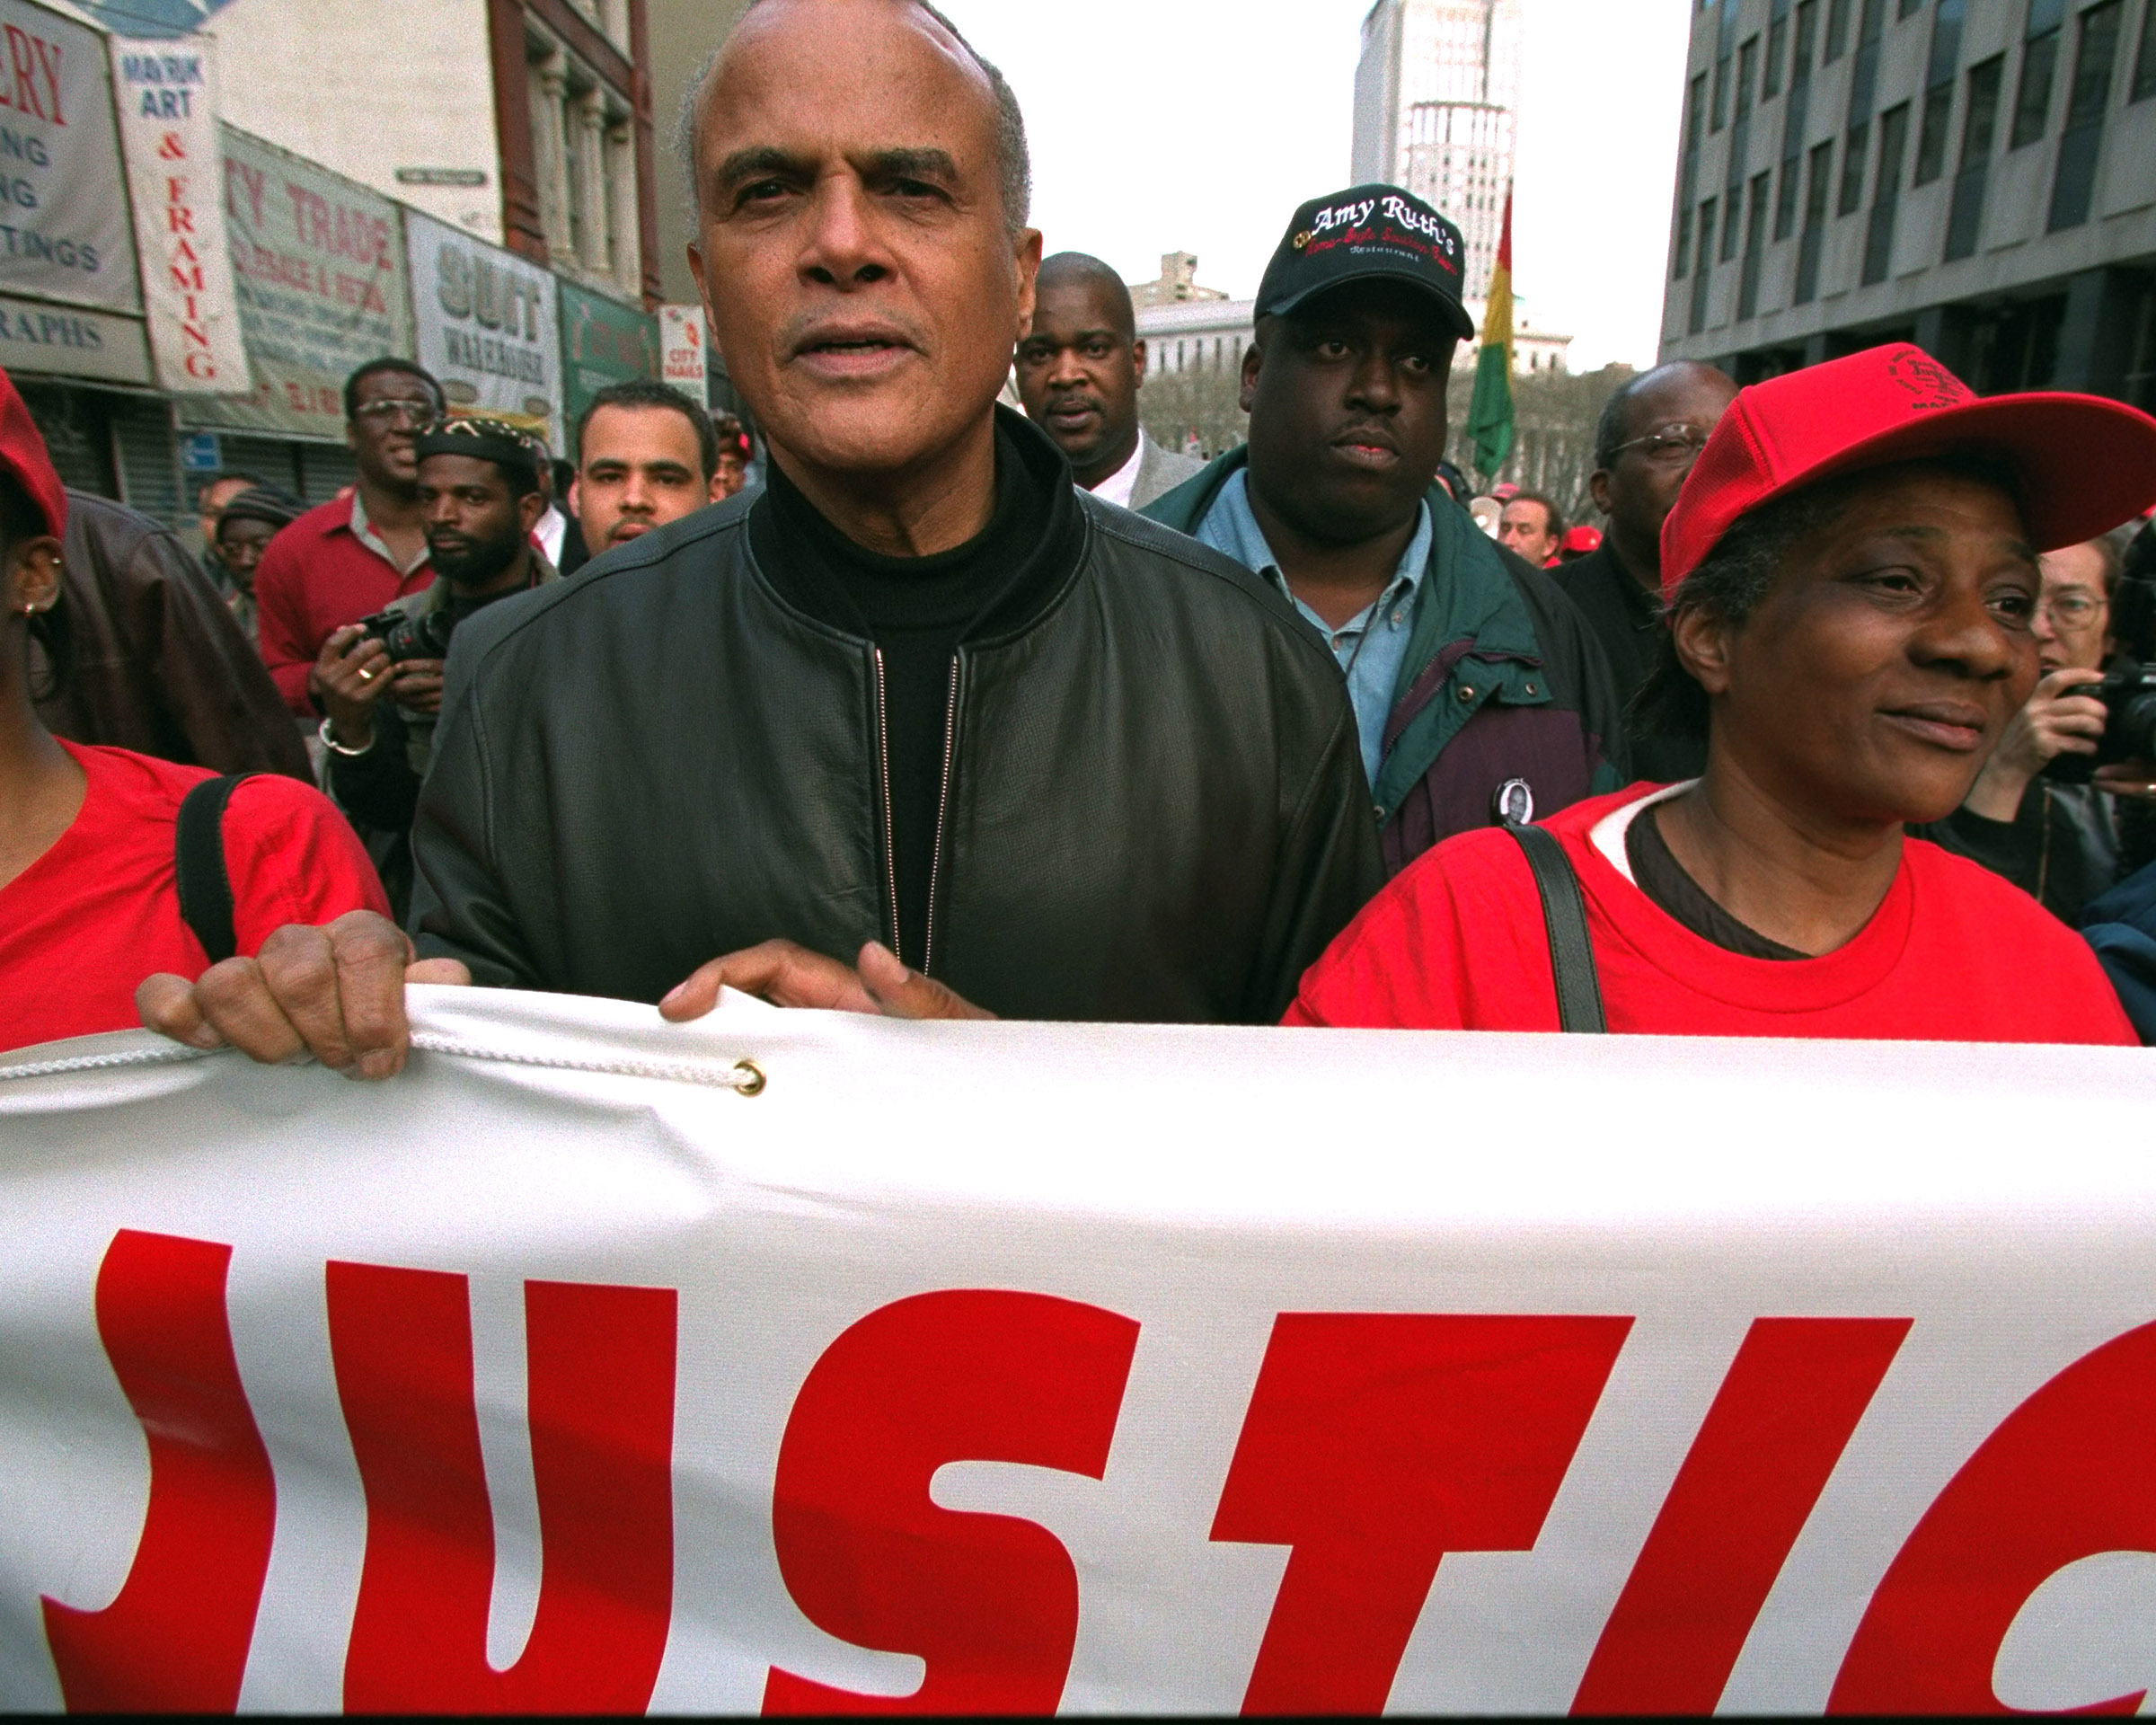 Lower Manhattan, Harry Belafonte at rally protesting police